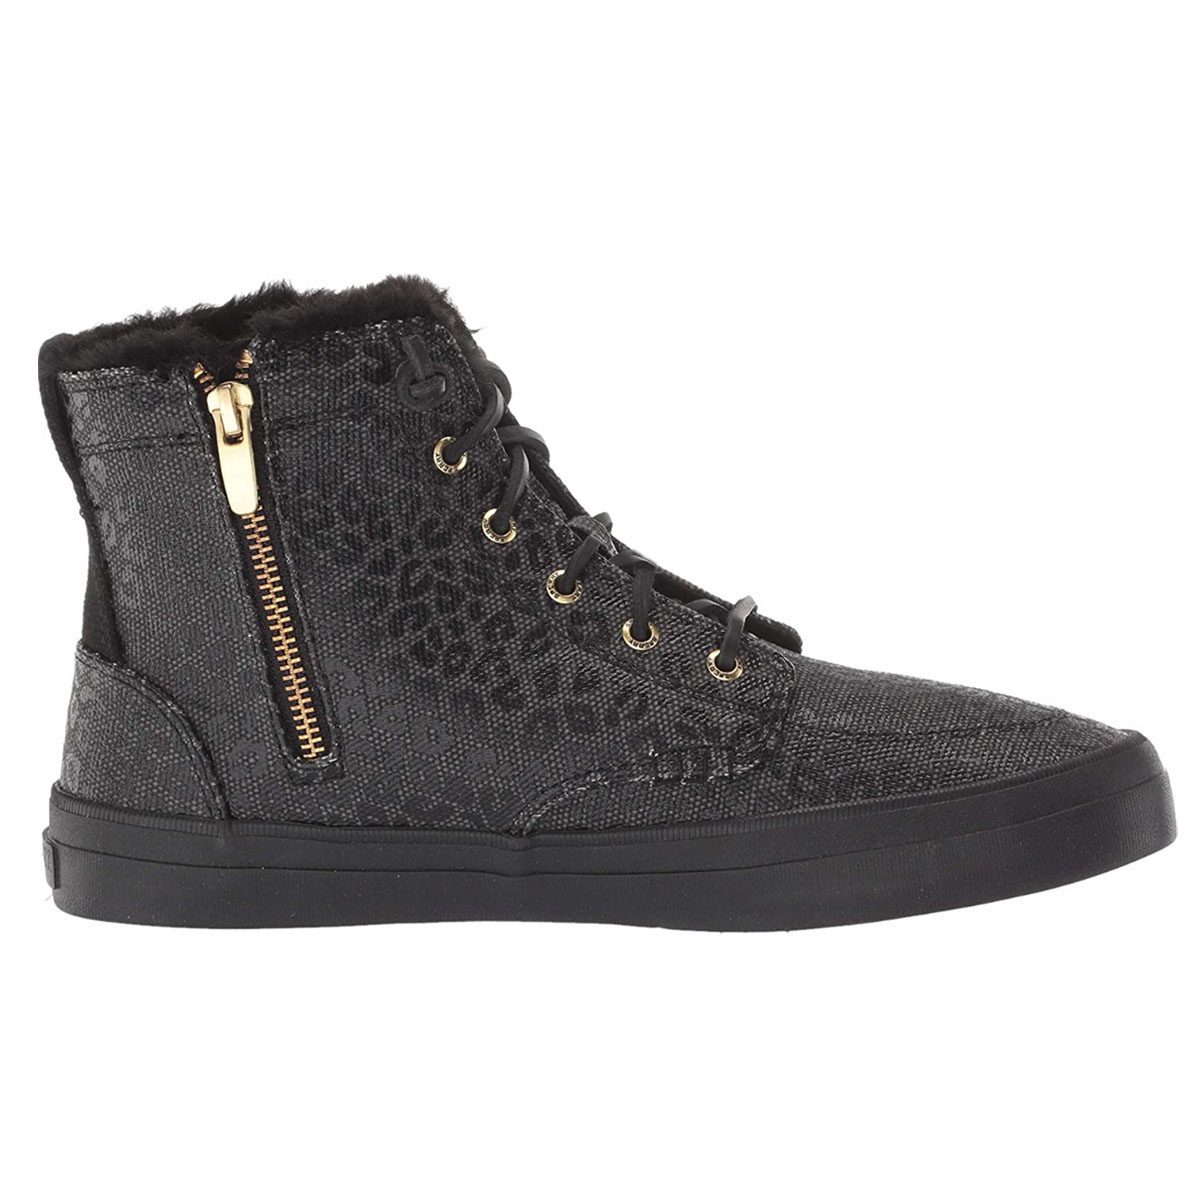 Sperry Women's Crest Vibe Animal Print Black High-Top Sneakers STS85921 ...